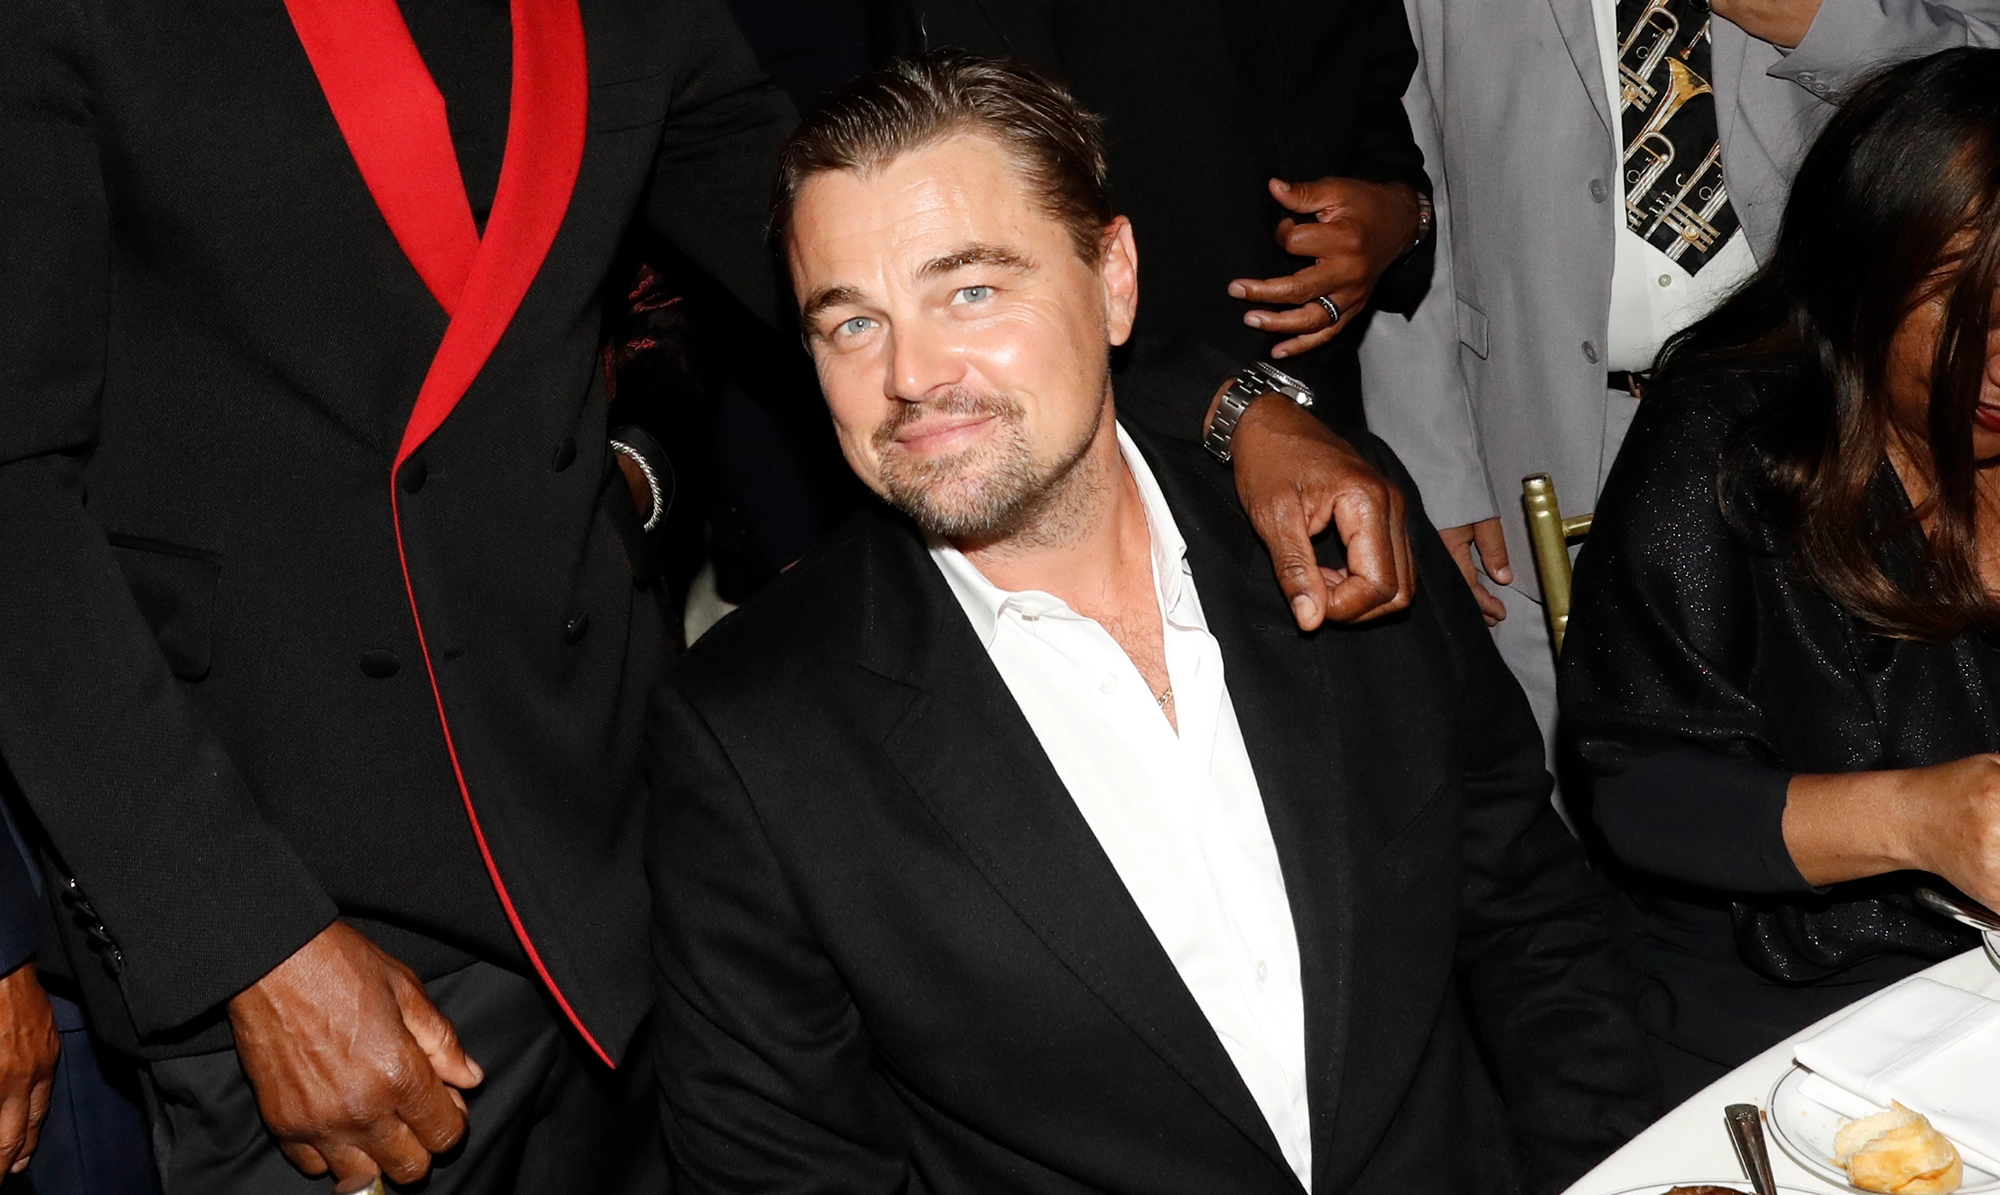 how to buy vip tickets to the leo dicaprio after party at cannes film festival